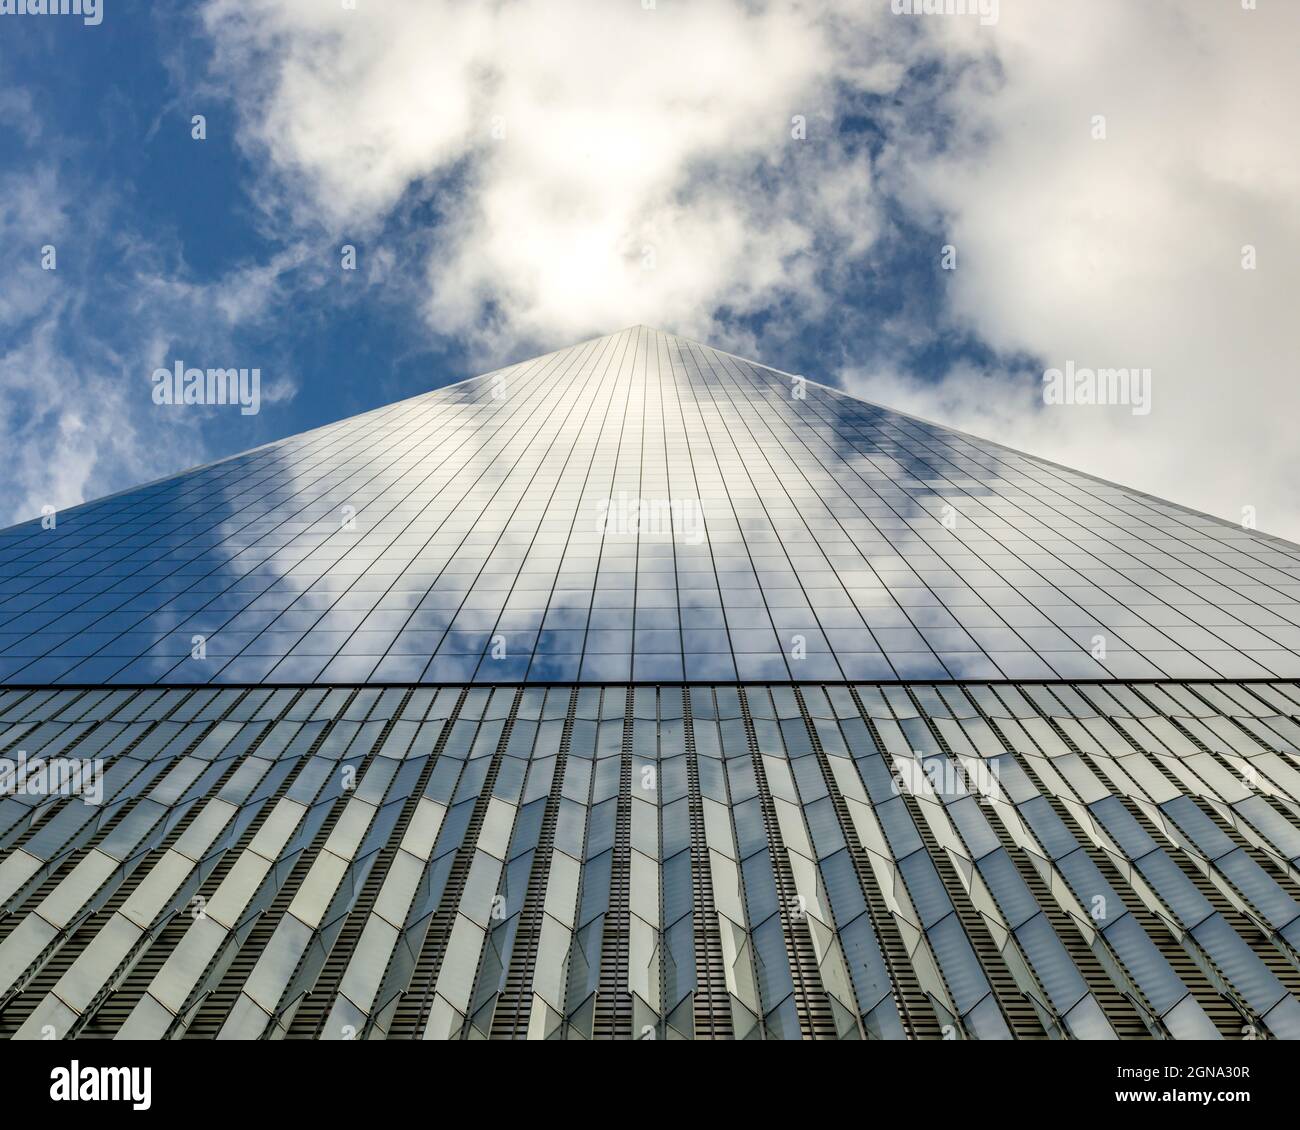 New York, USA, 23 September 2021 - One World Trade Center, also known as Freedom Tower, is the tallest building in the Western hemisphere Credit: Enri Stock Photo